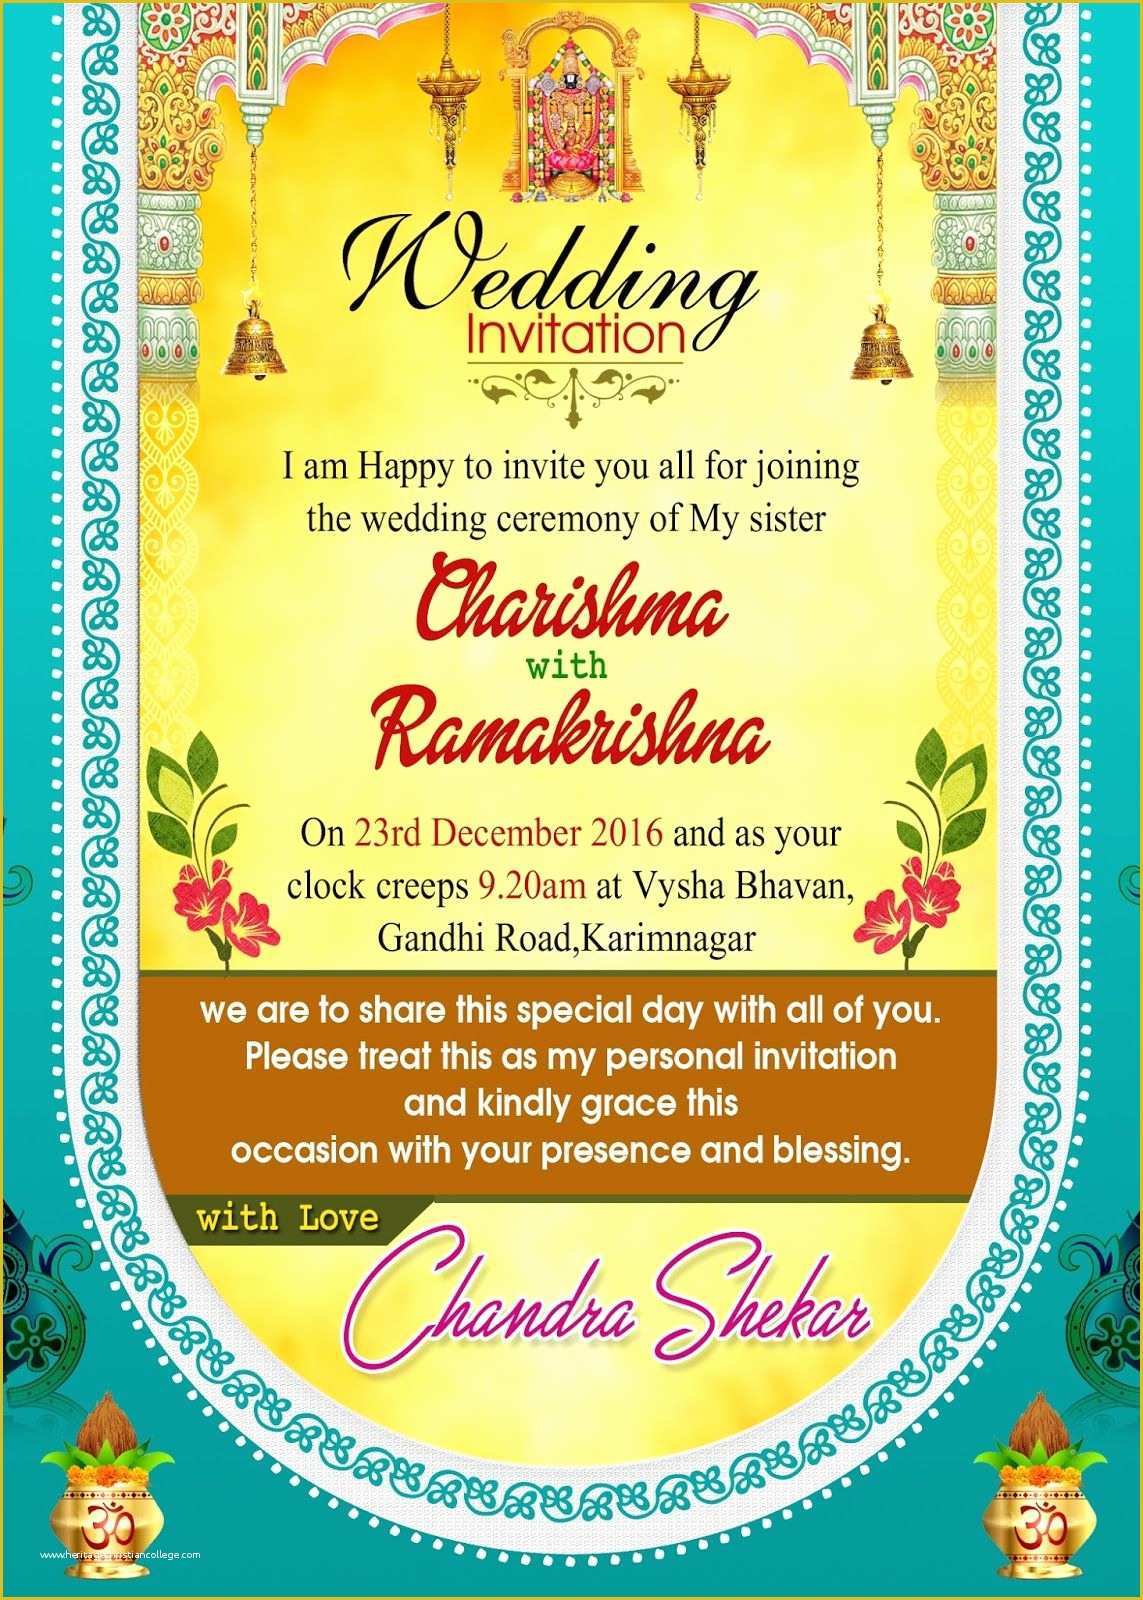 Email Indian Wedding Invitation Templates Free Of Pin by Kakuli Mishra On Indian Wedding Invitations